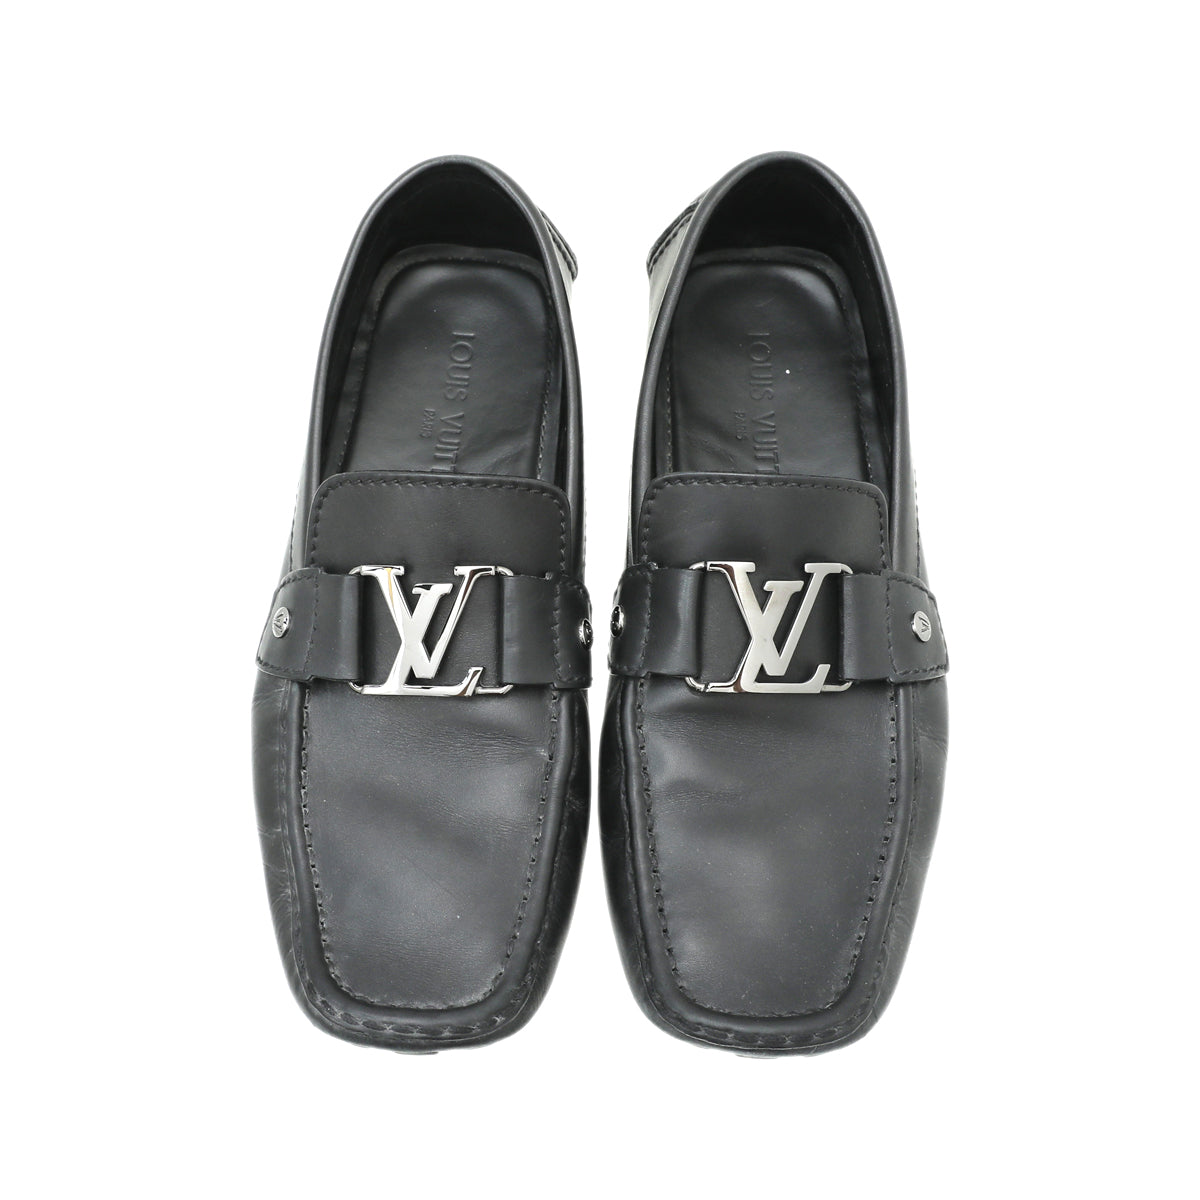 Monte carlo leather flats Louis Vuitton Black size 43 EU in Leather -  32691957